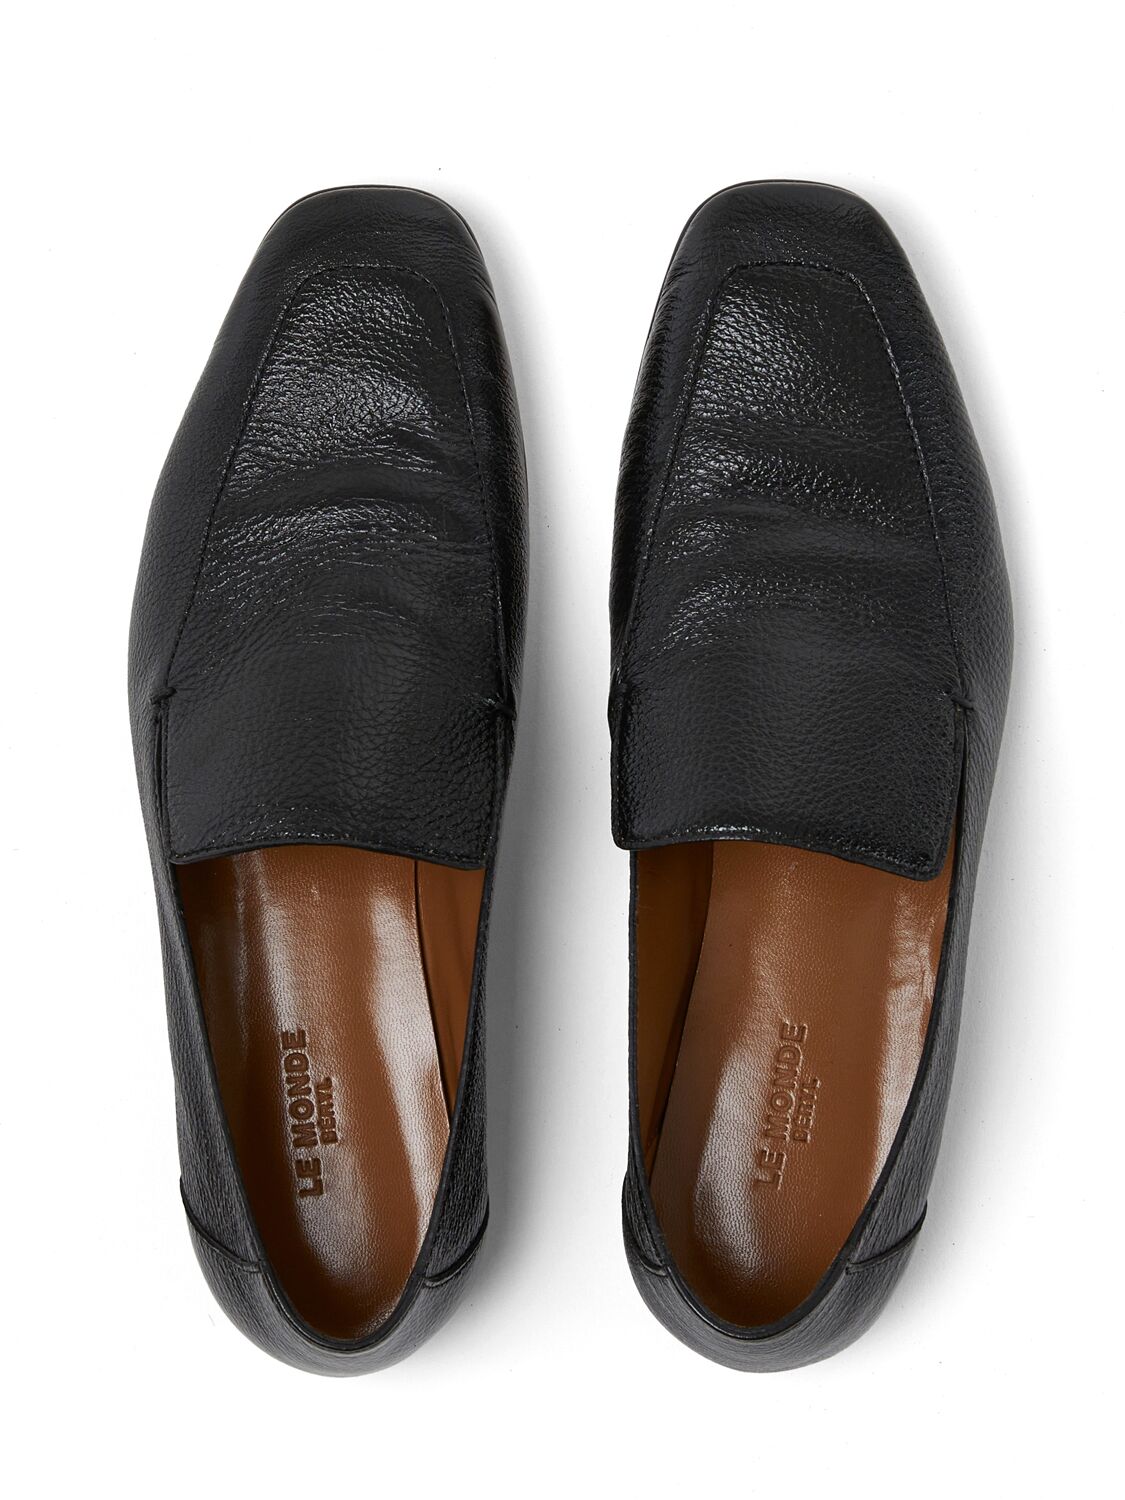 Le Monde Beryl 10mm Soft Patent Leather Loafers In Black